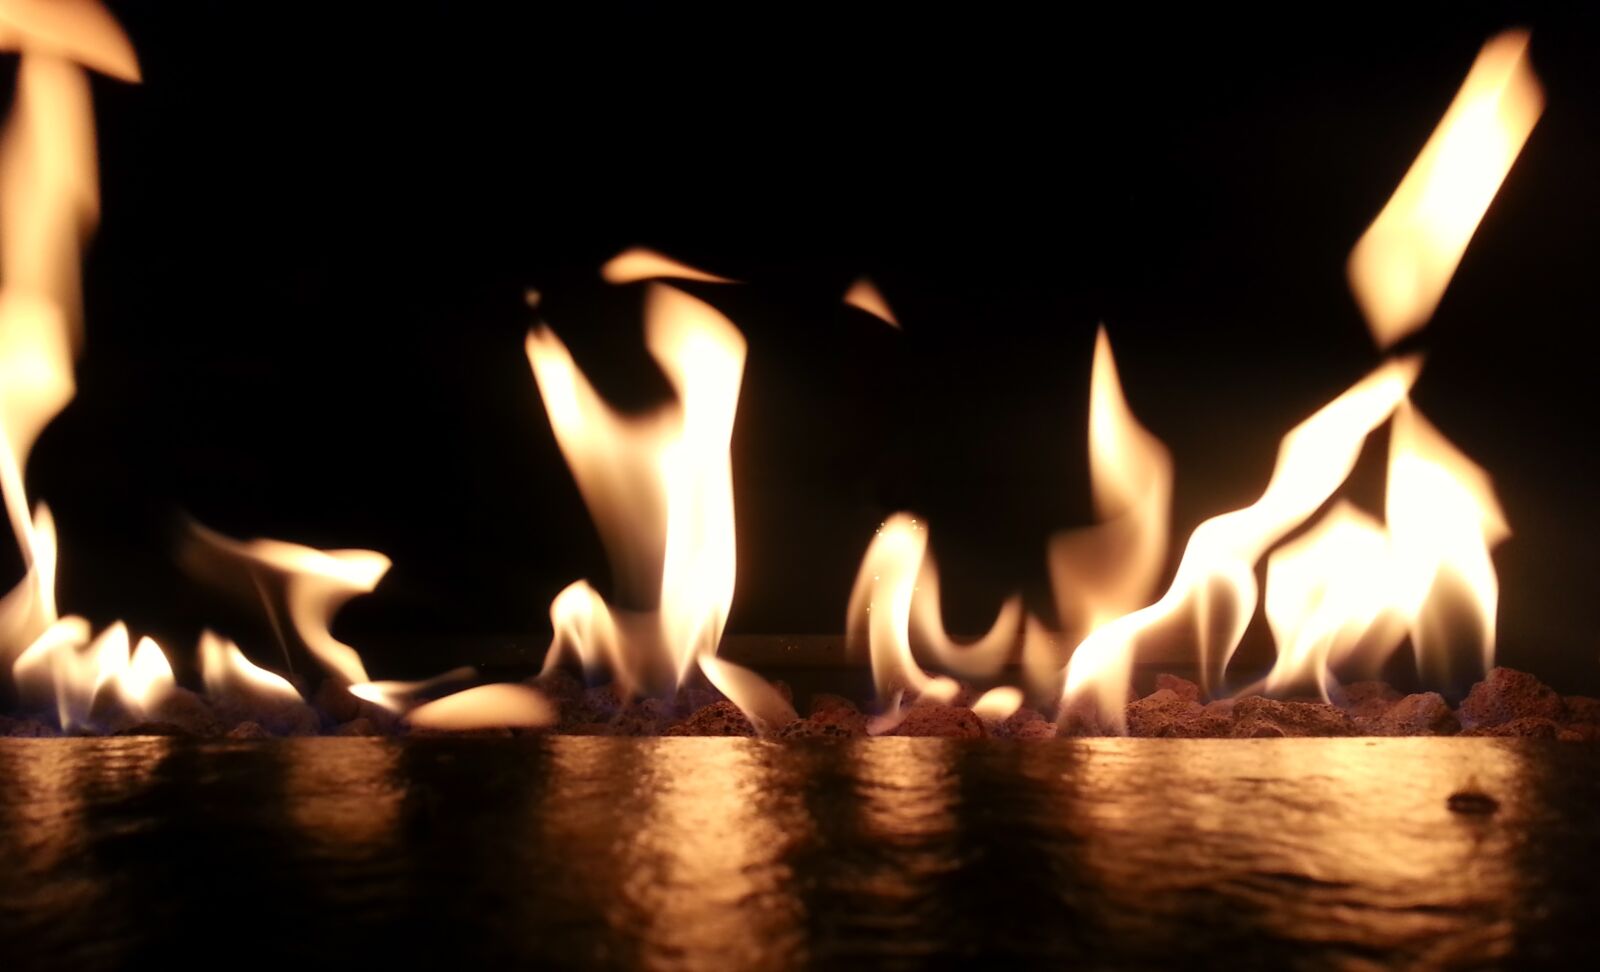 Samsung Galaxy S3 sample photo. Camping, fire, flame photography